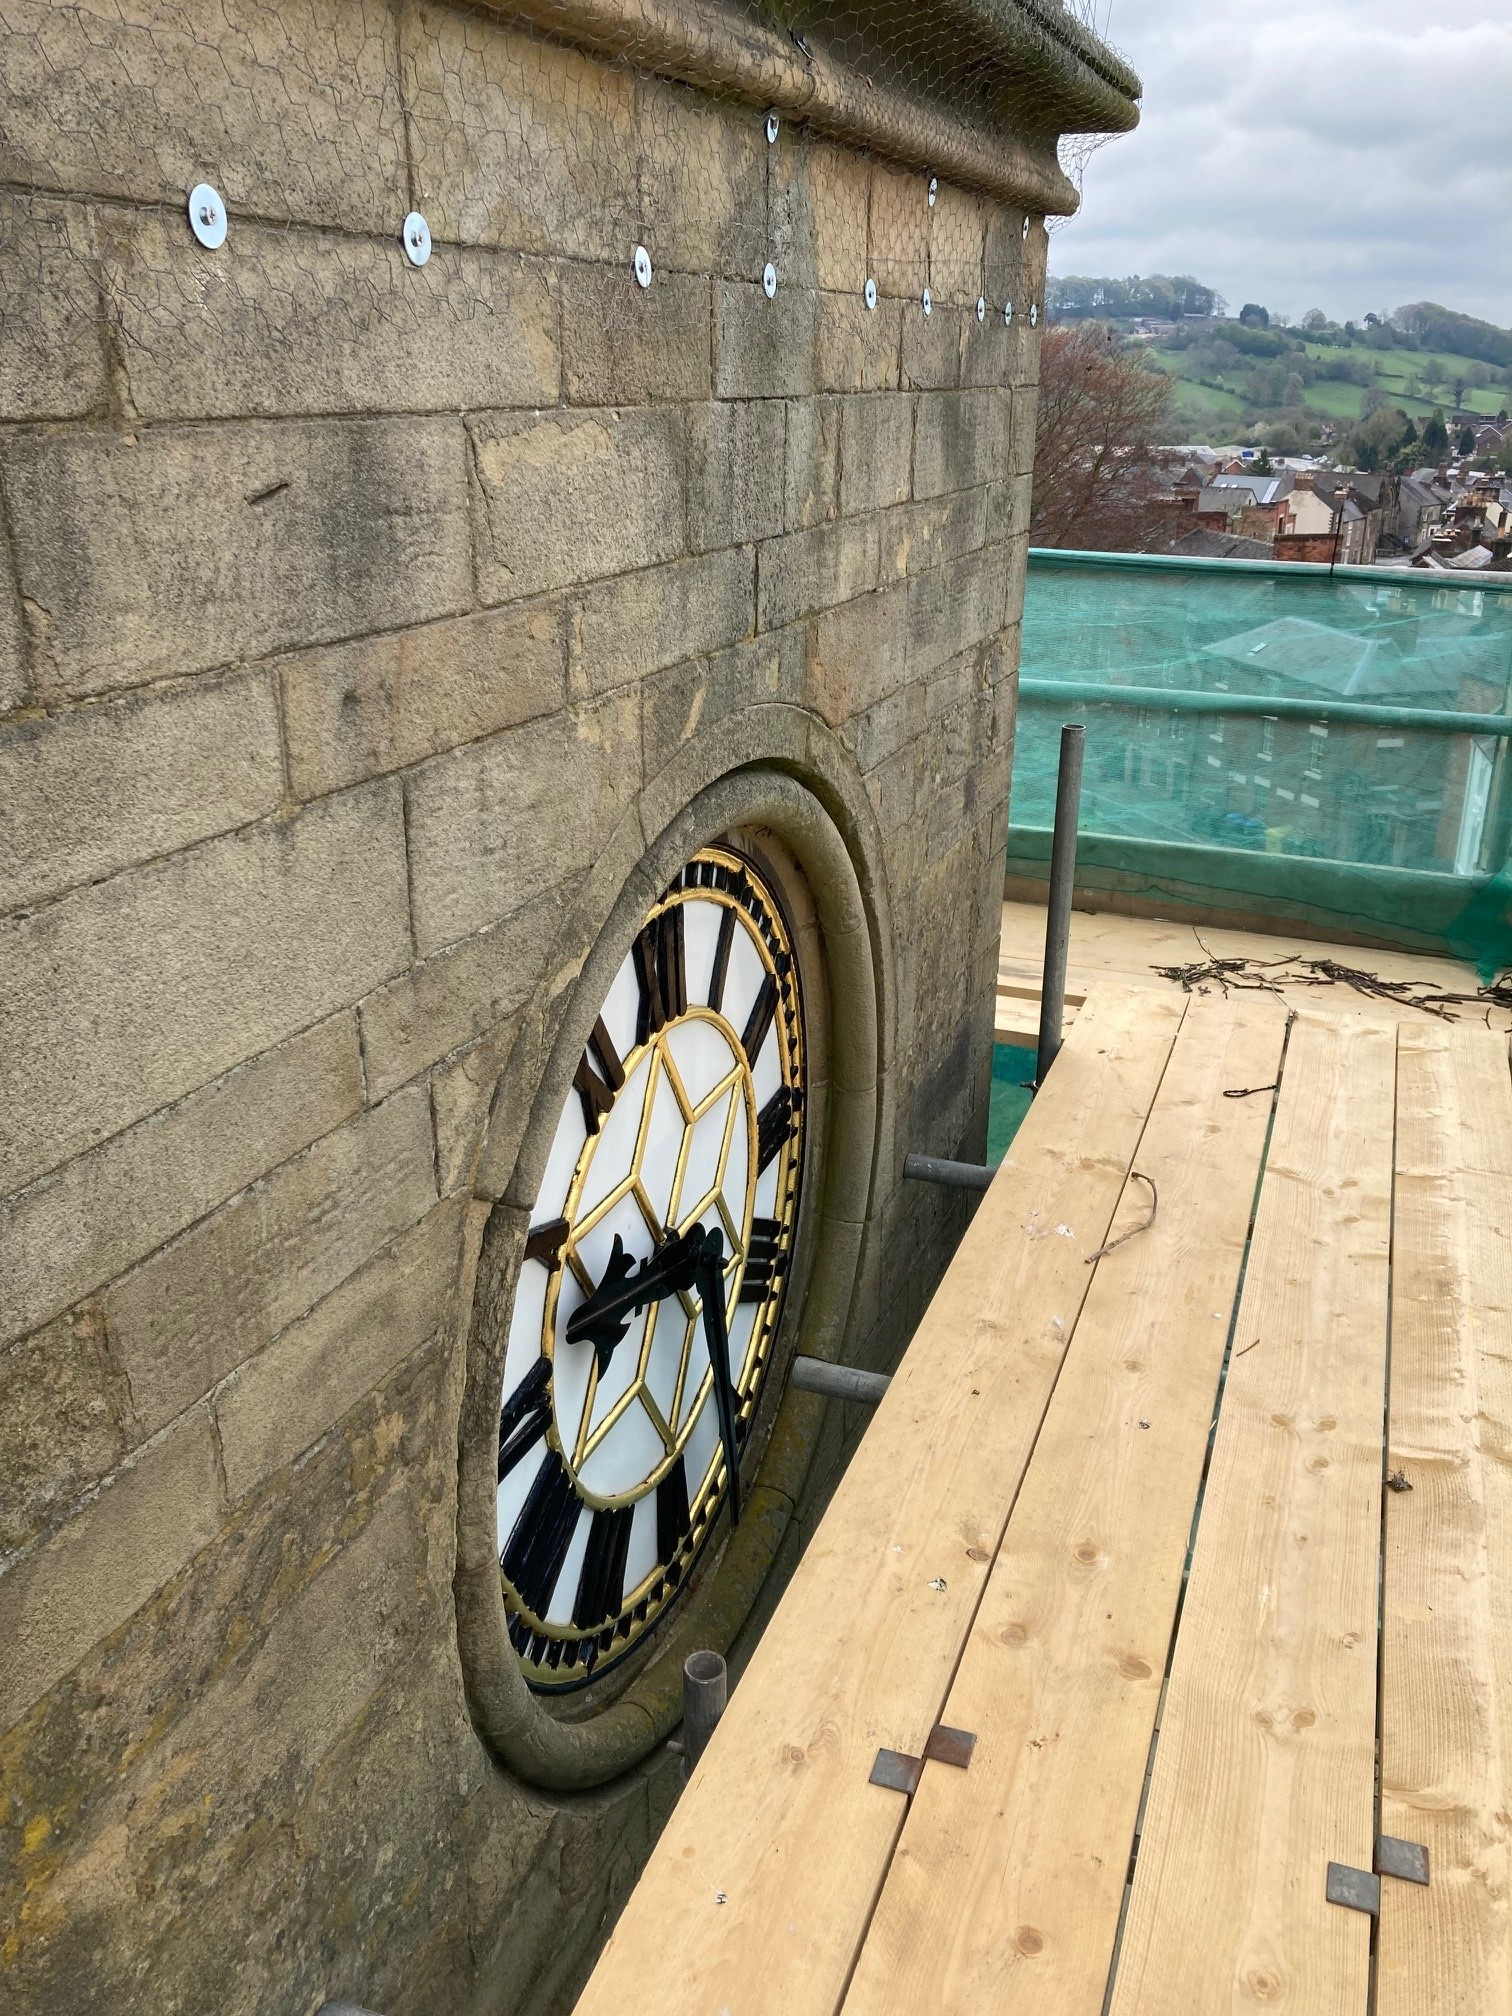 Clock face from the scaffolding